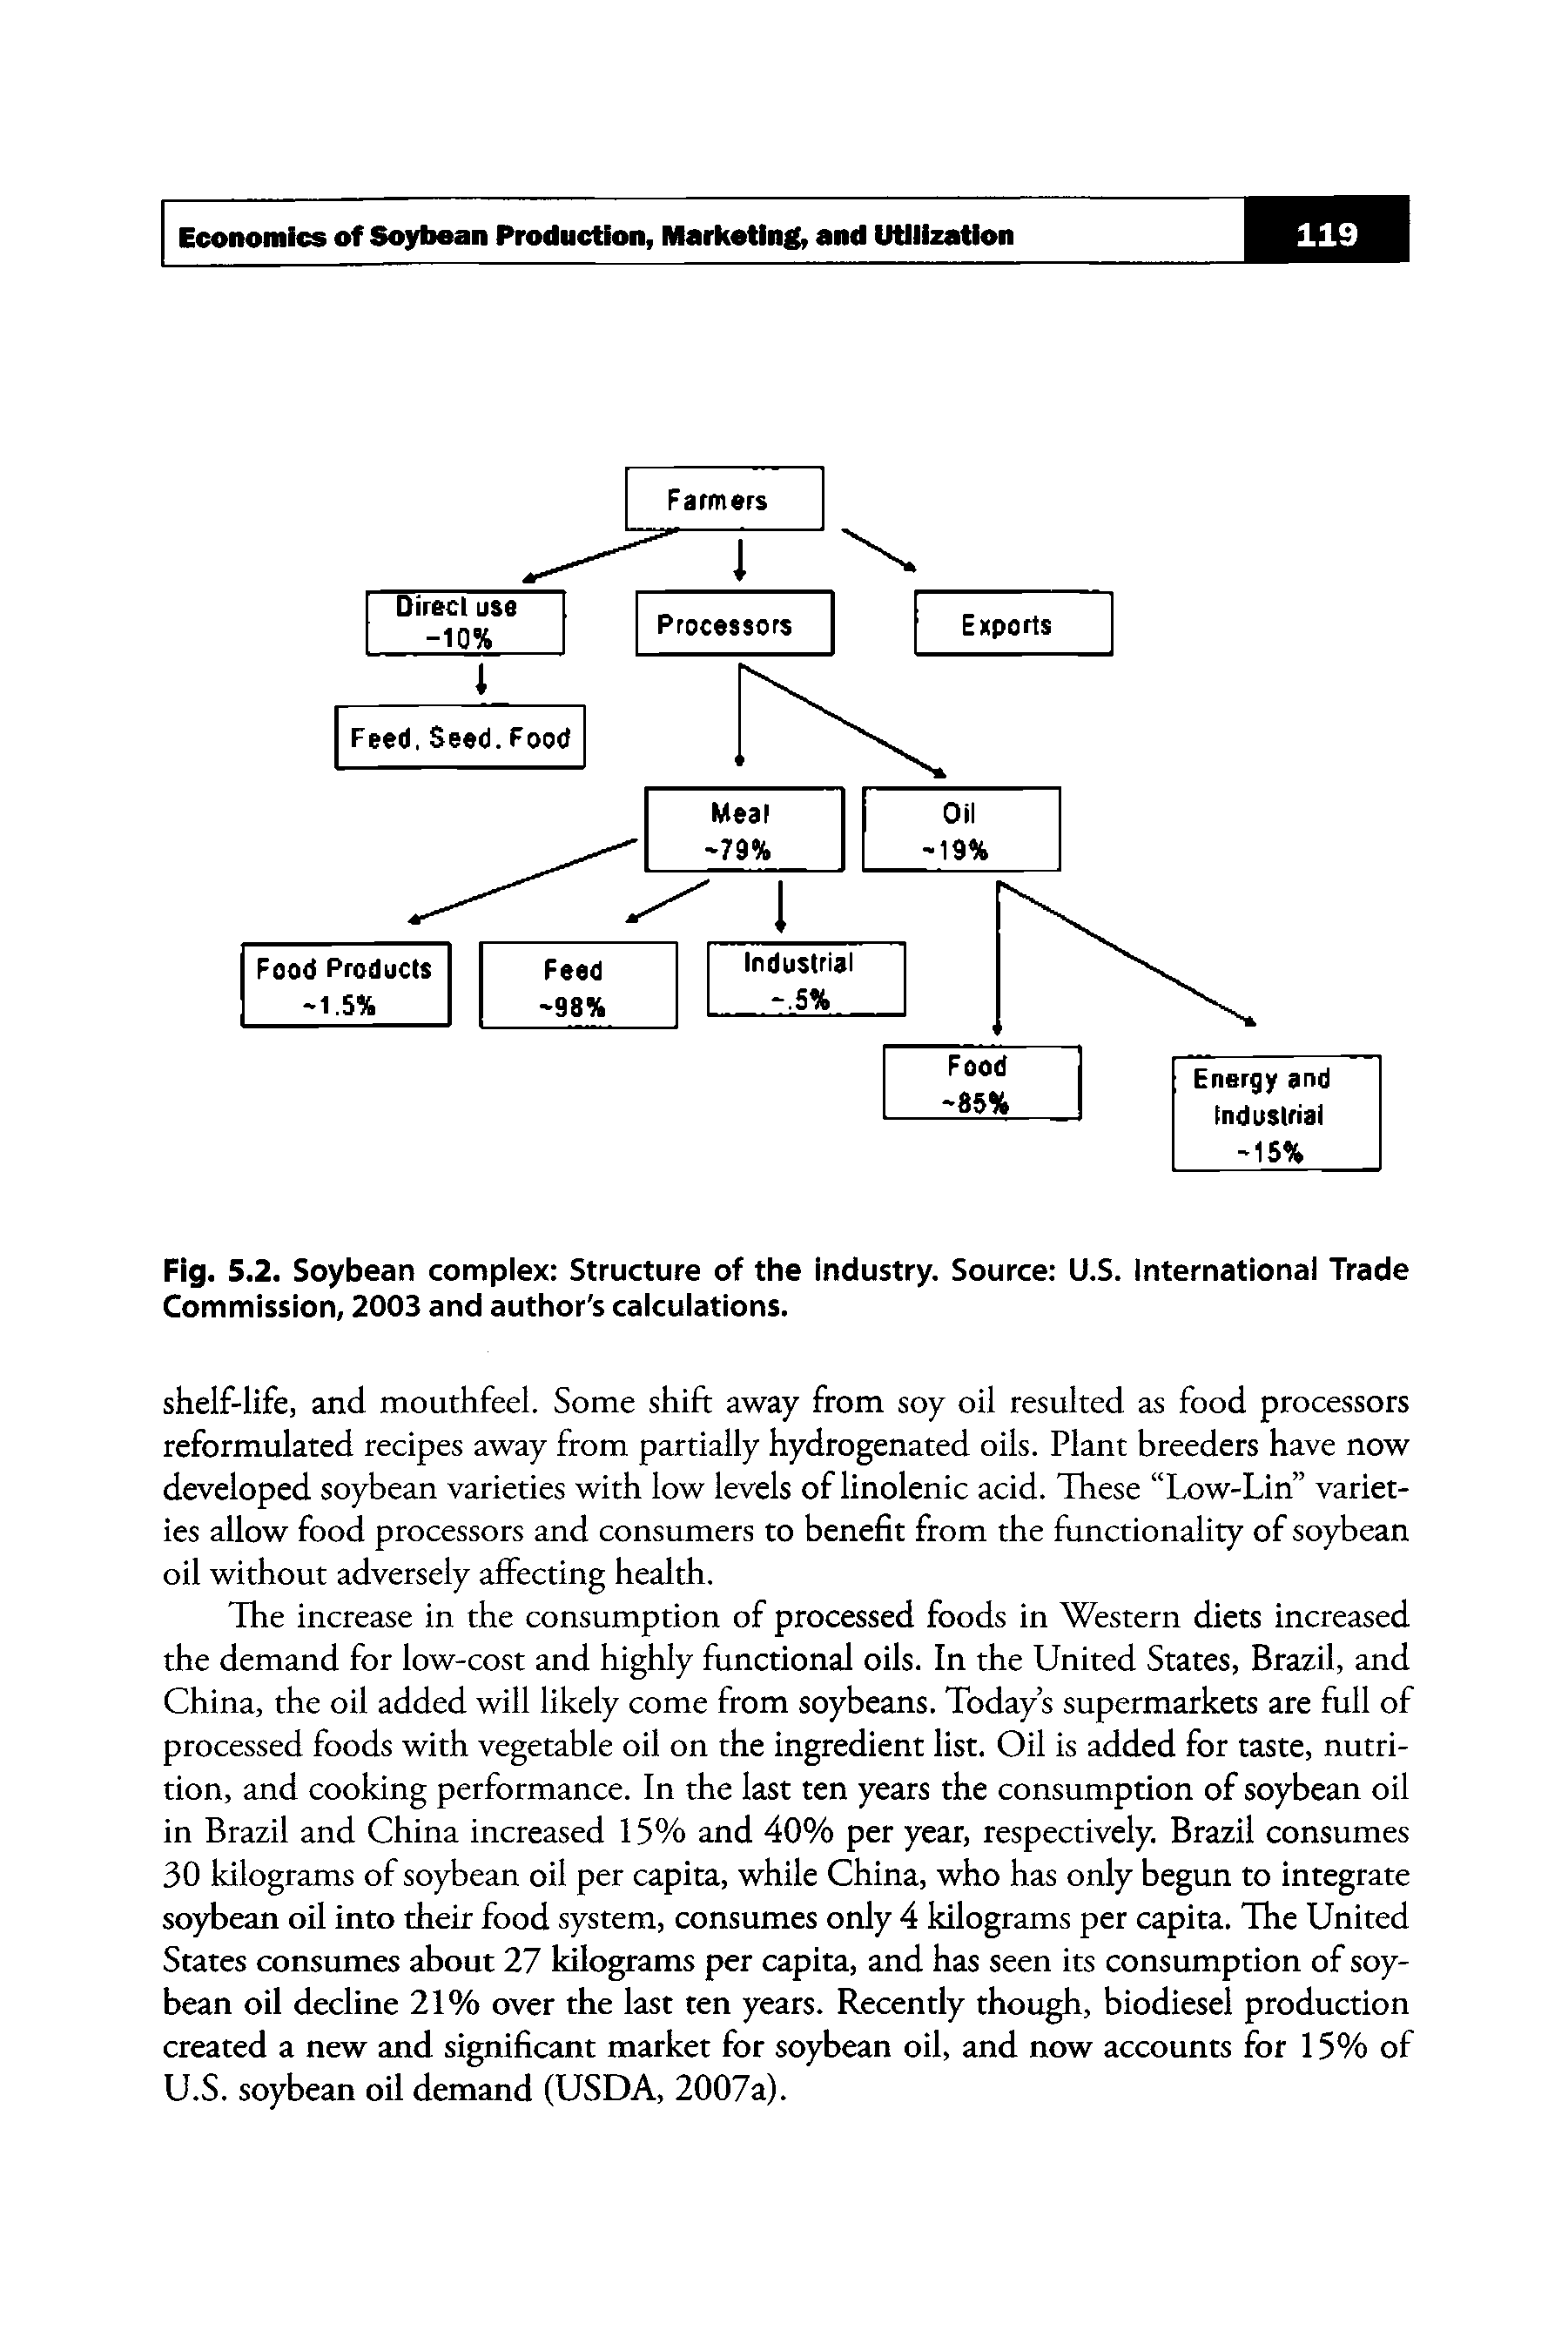 Fig. 5.2. Soybean complex Structure of the industry. Source U.S. International Trade Commission, 2003 and author s calculations.